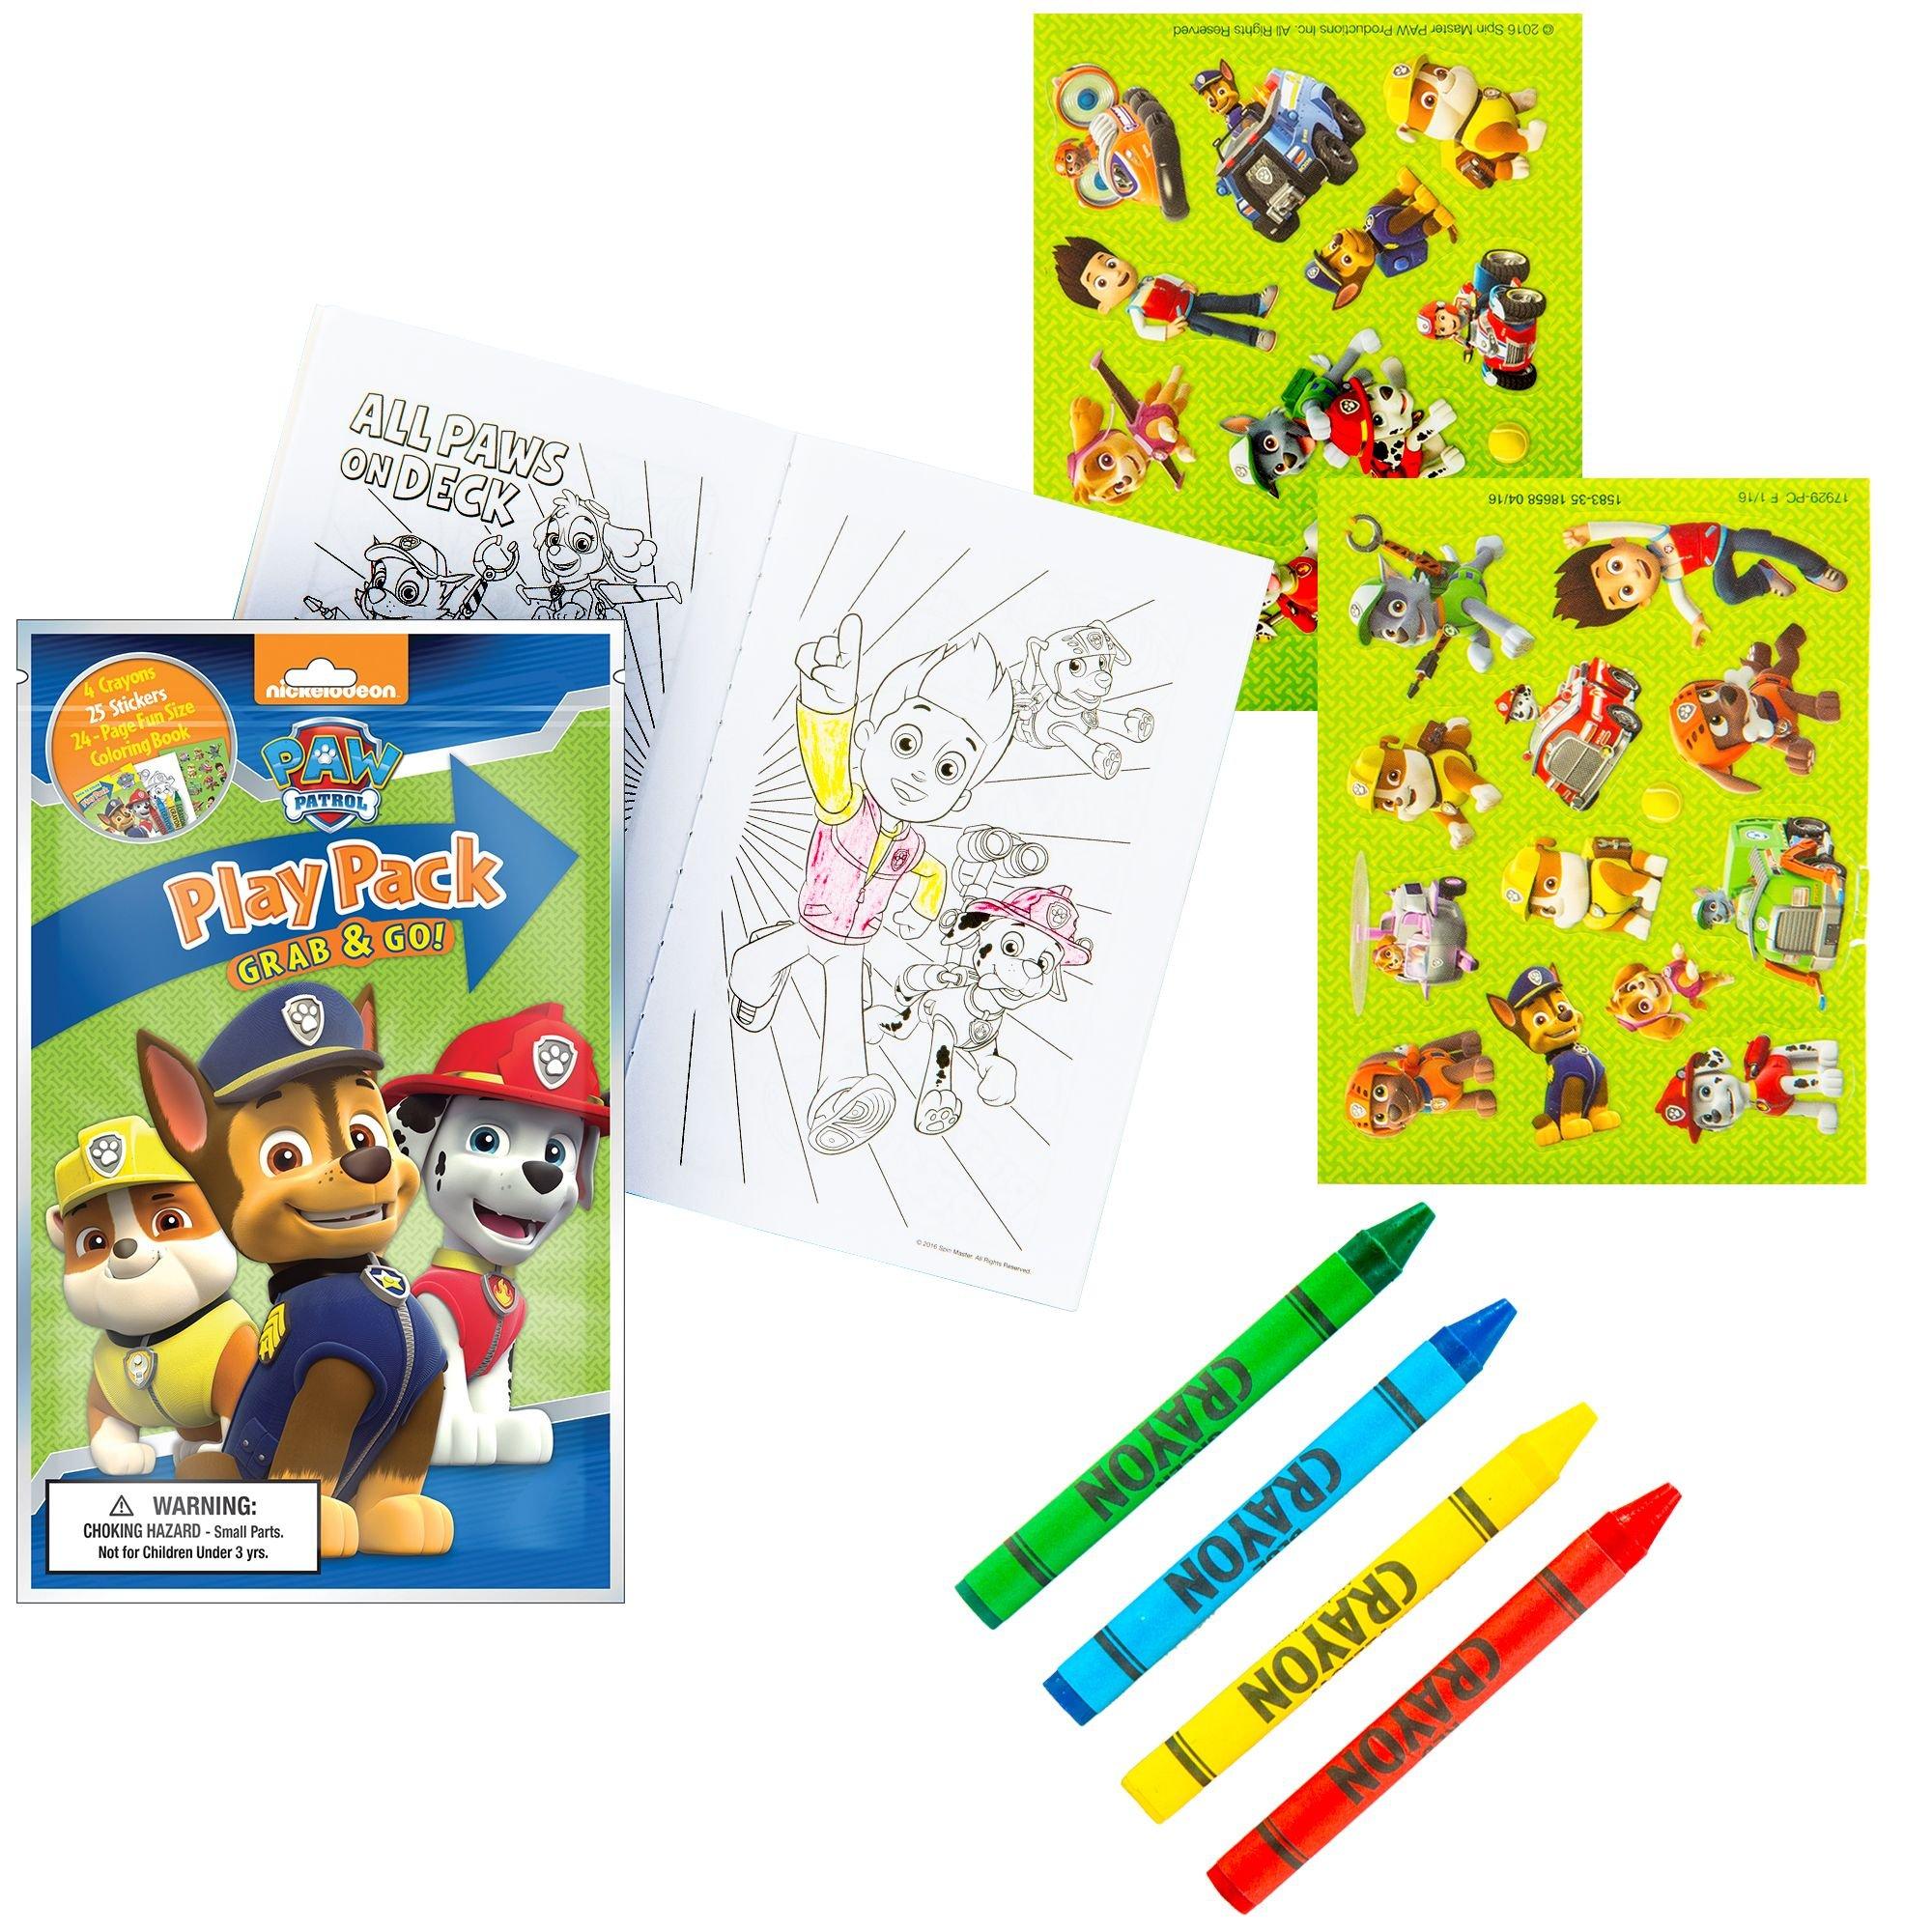 Paw Patrol Color and Sticker Activity Set